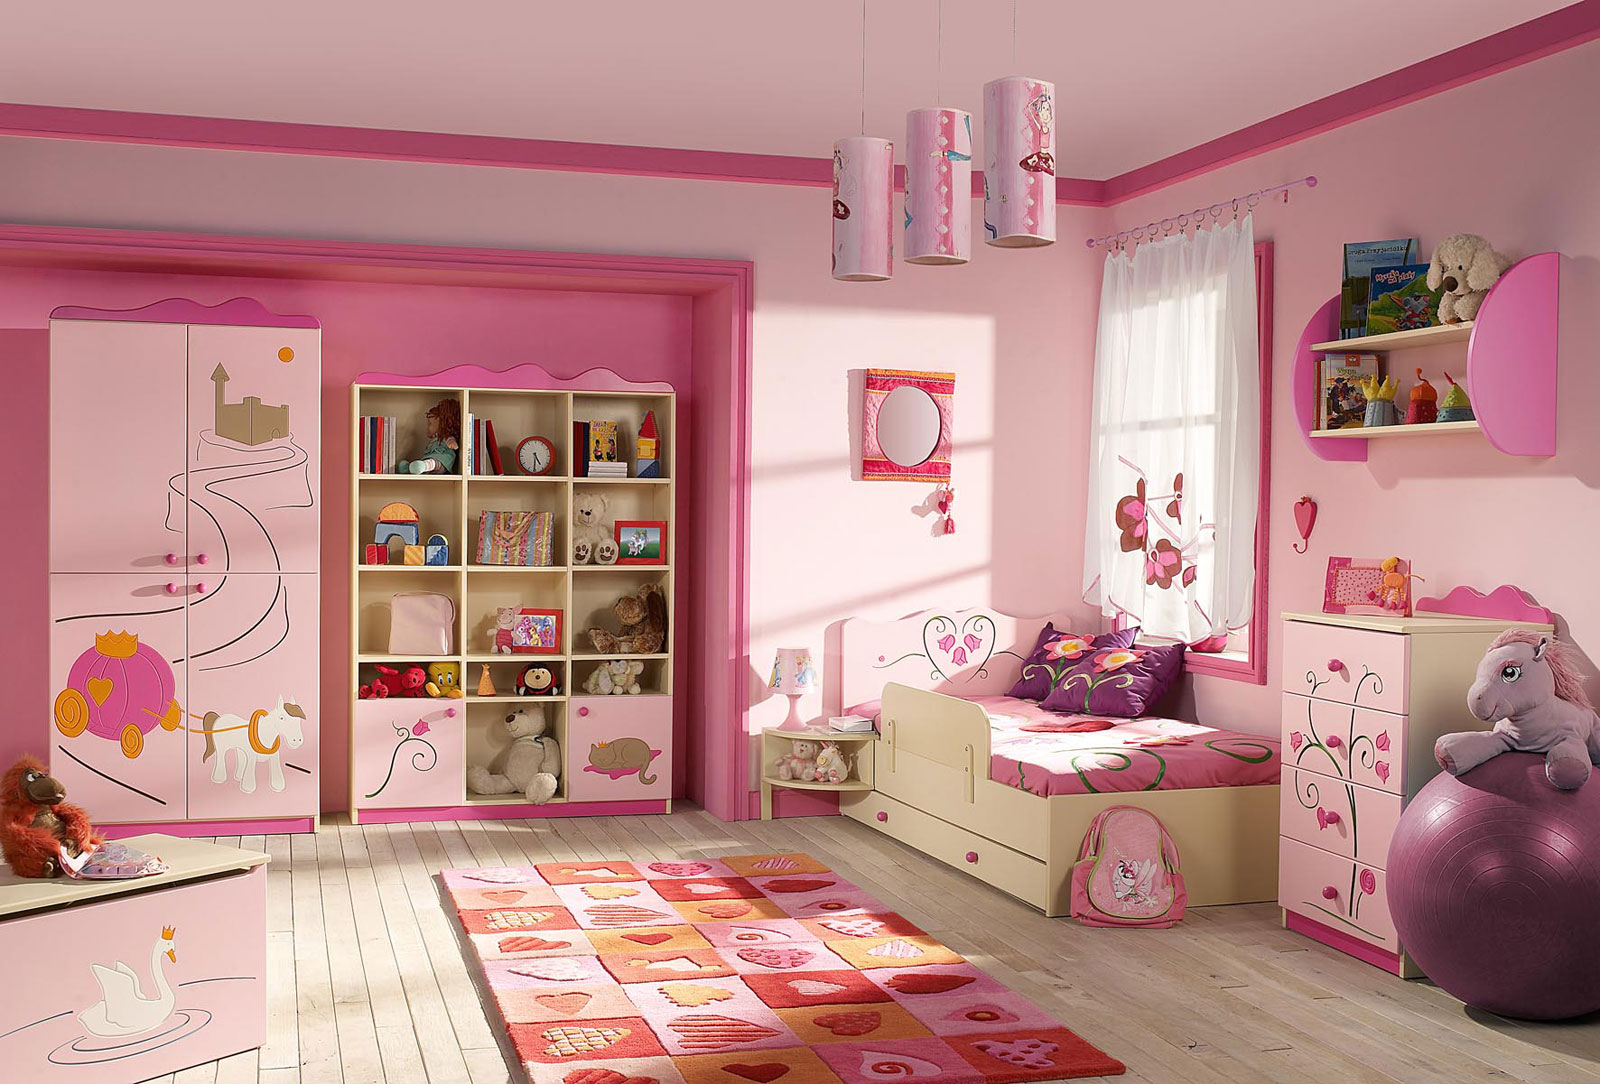 Pink Bedroom Decorations Inspiring Pink Bedroom Color With Decorations Cabinet And Single Bed Of Girls Bedroom Furniture Completed With Drawers And Wall Cabinet Bedroom Girls Bedroom Furniture: The Beach Condo Ideas